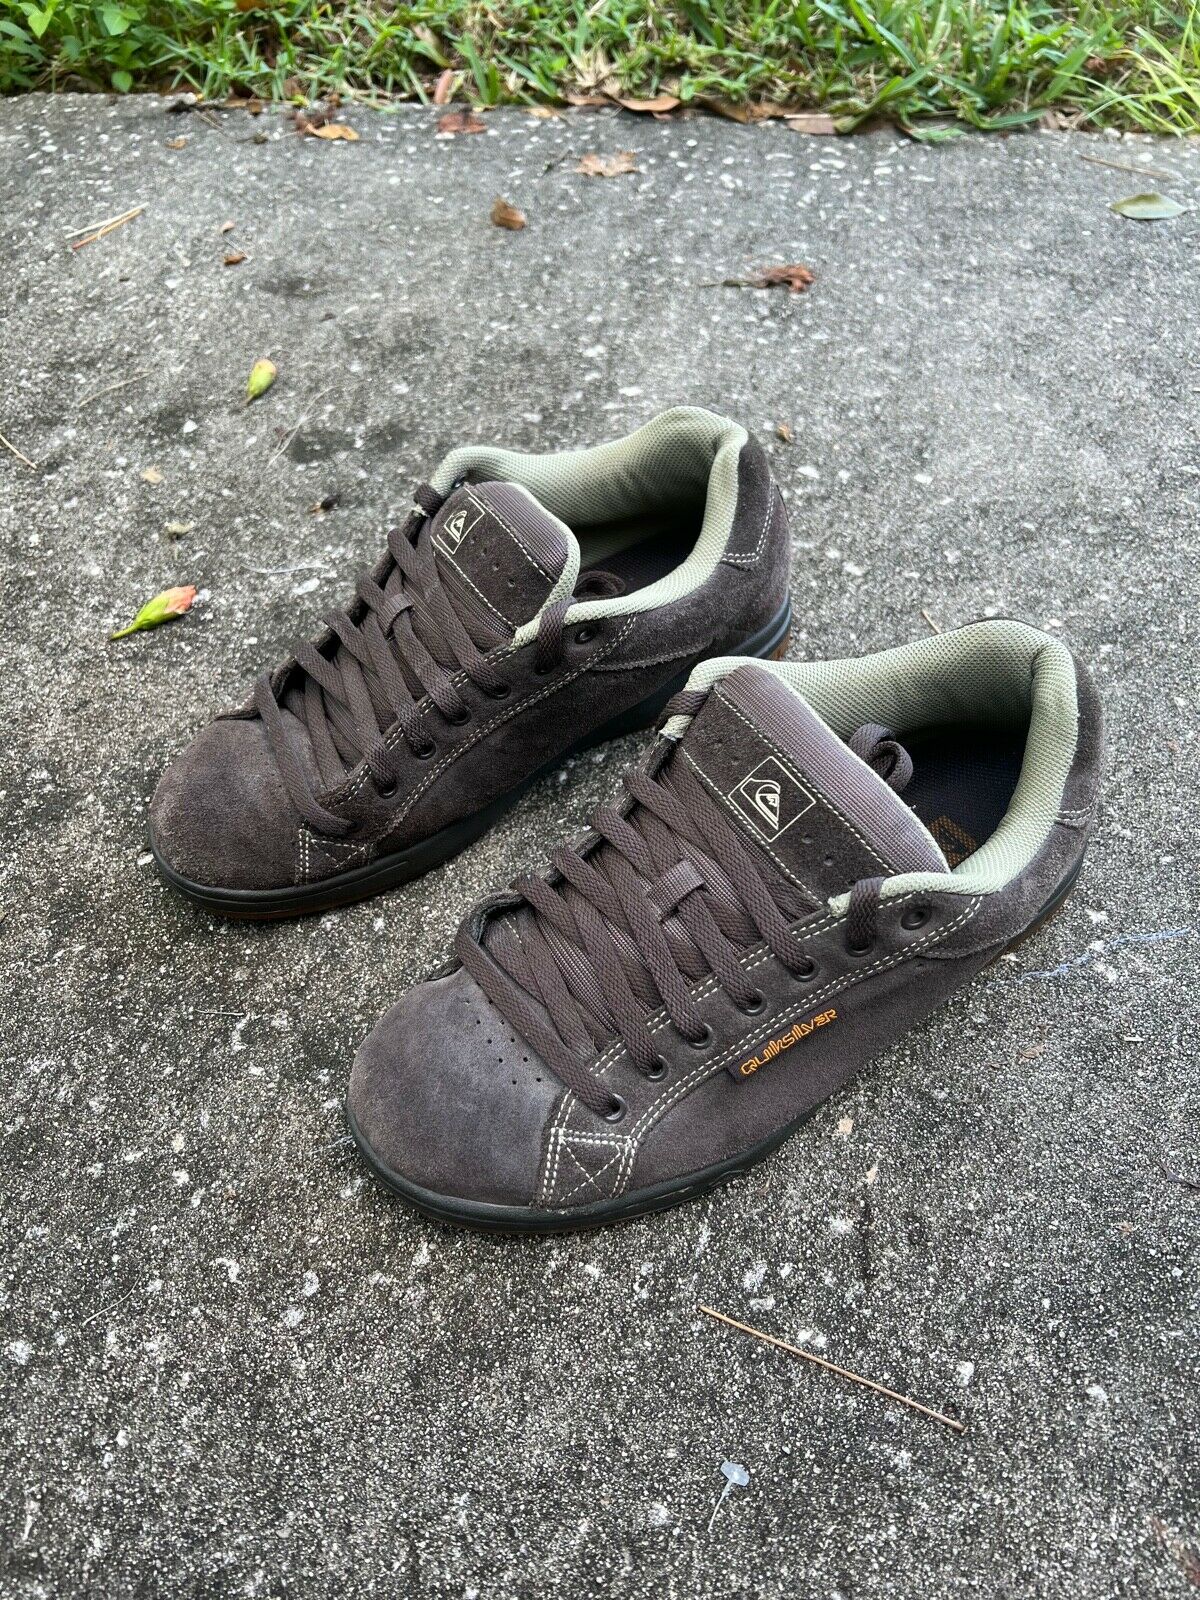 Vintage Quiksilver Puffer Brown Skate Shoes